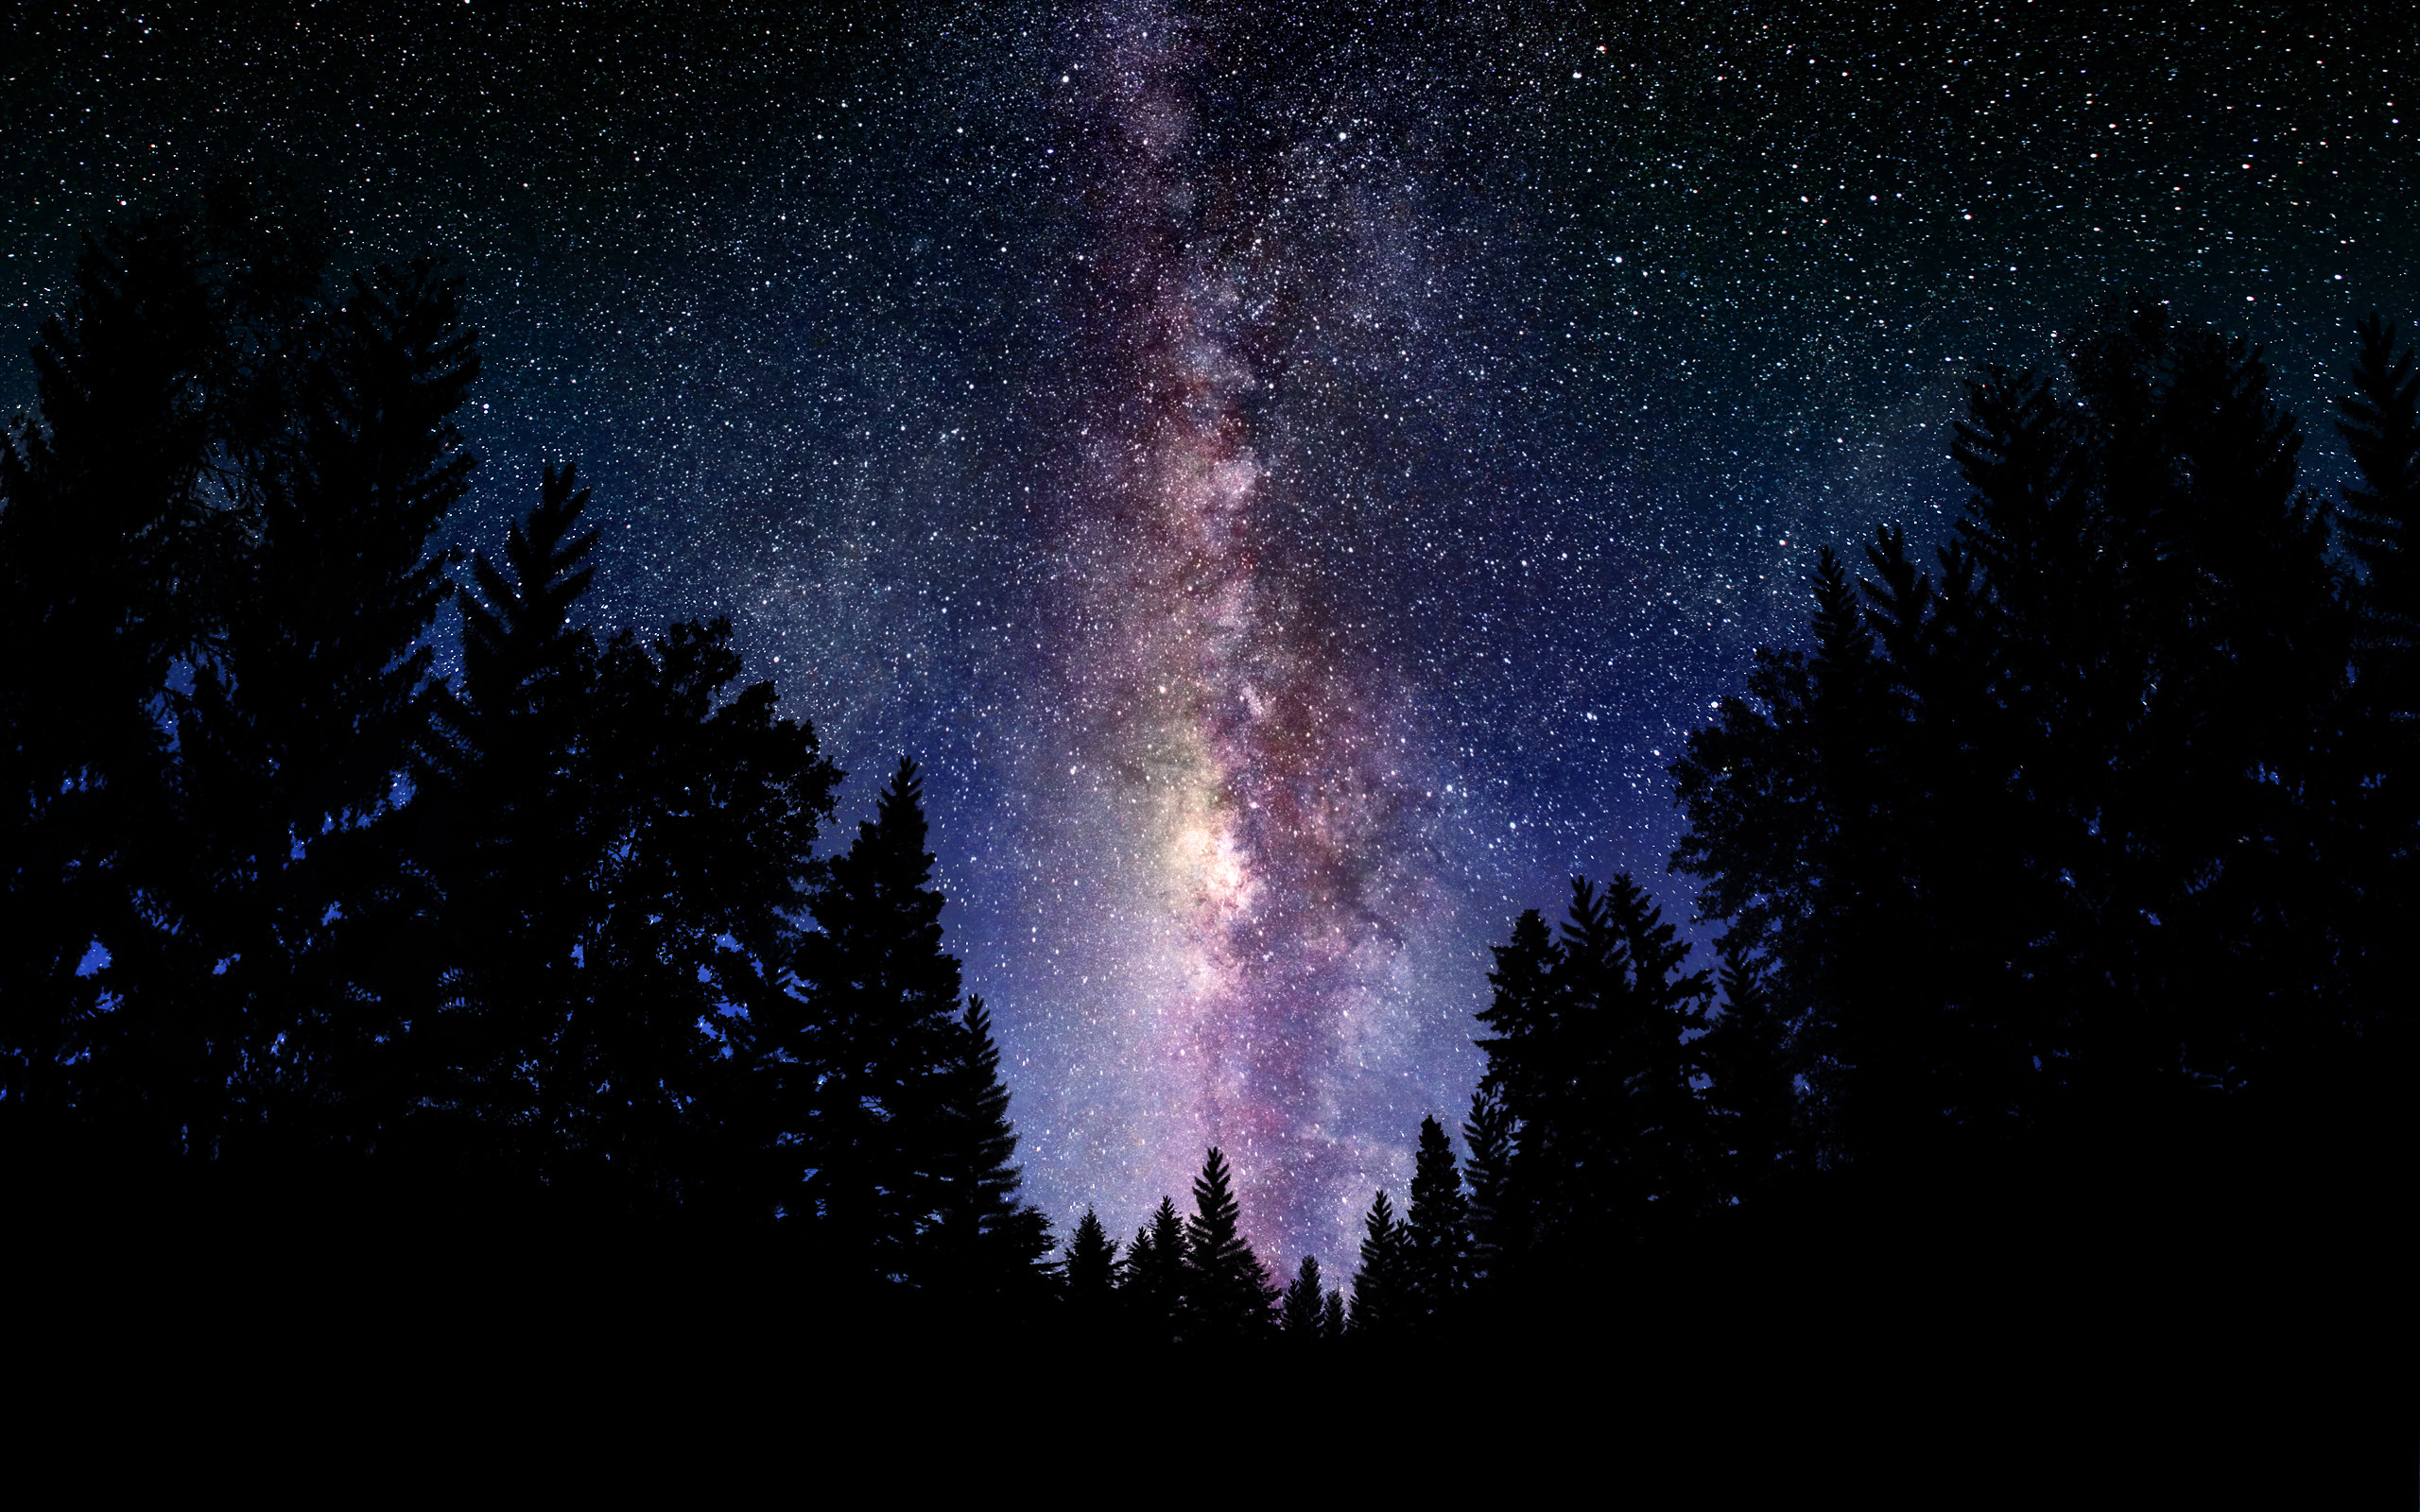 2560x1600 wallpaper Starry Night sky over the forest. Wallpapers 3d for desktop .